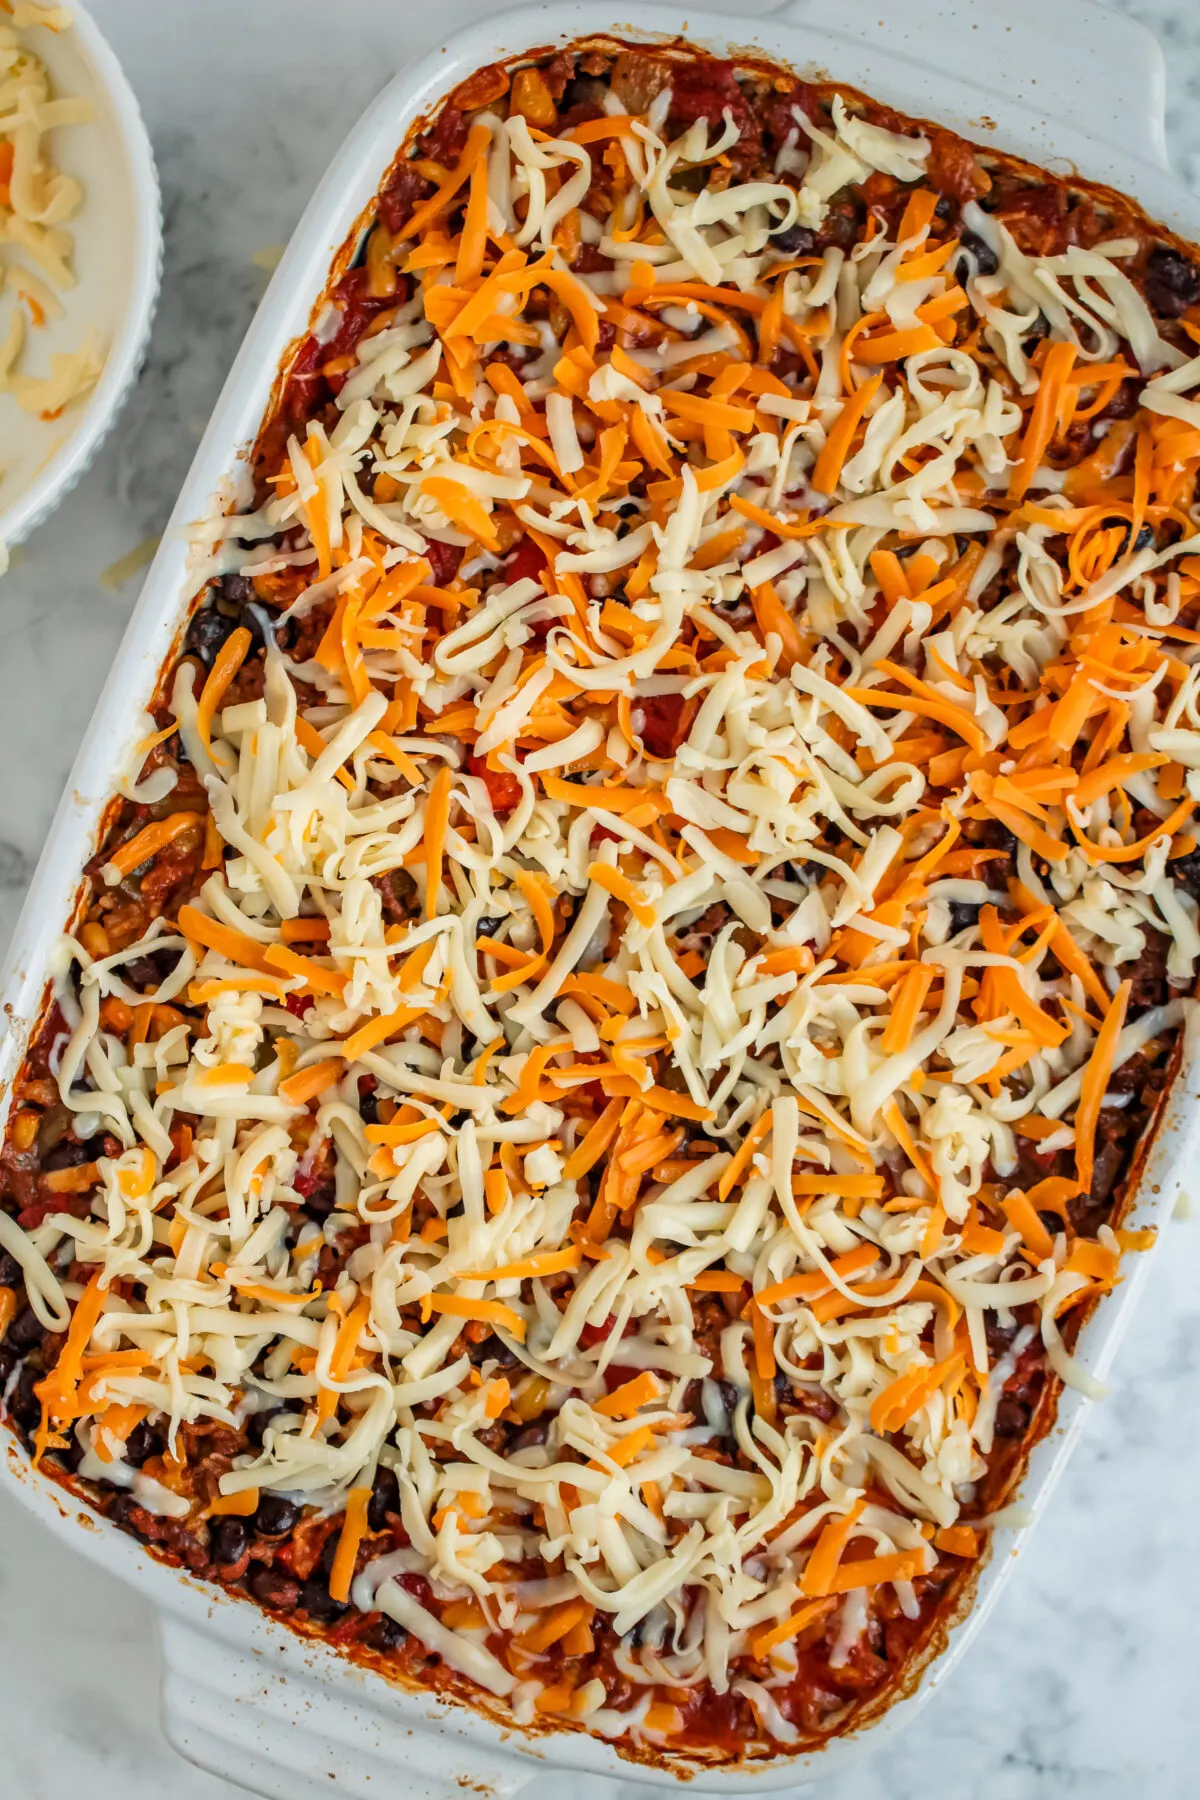 Baked casserole topped with cheese,